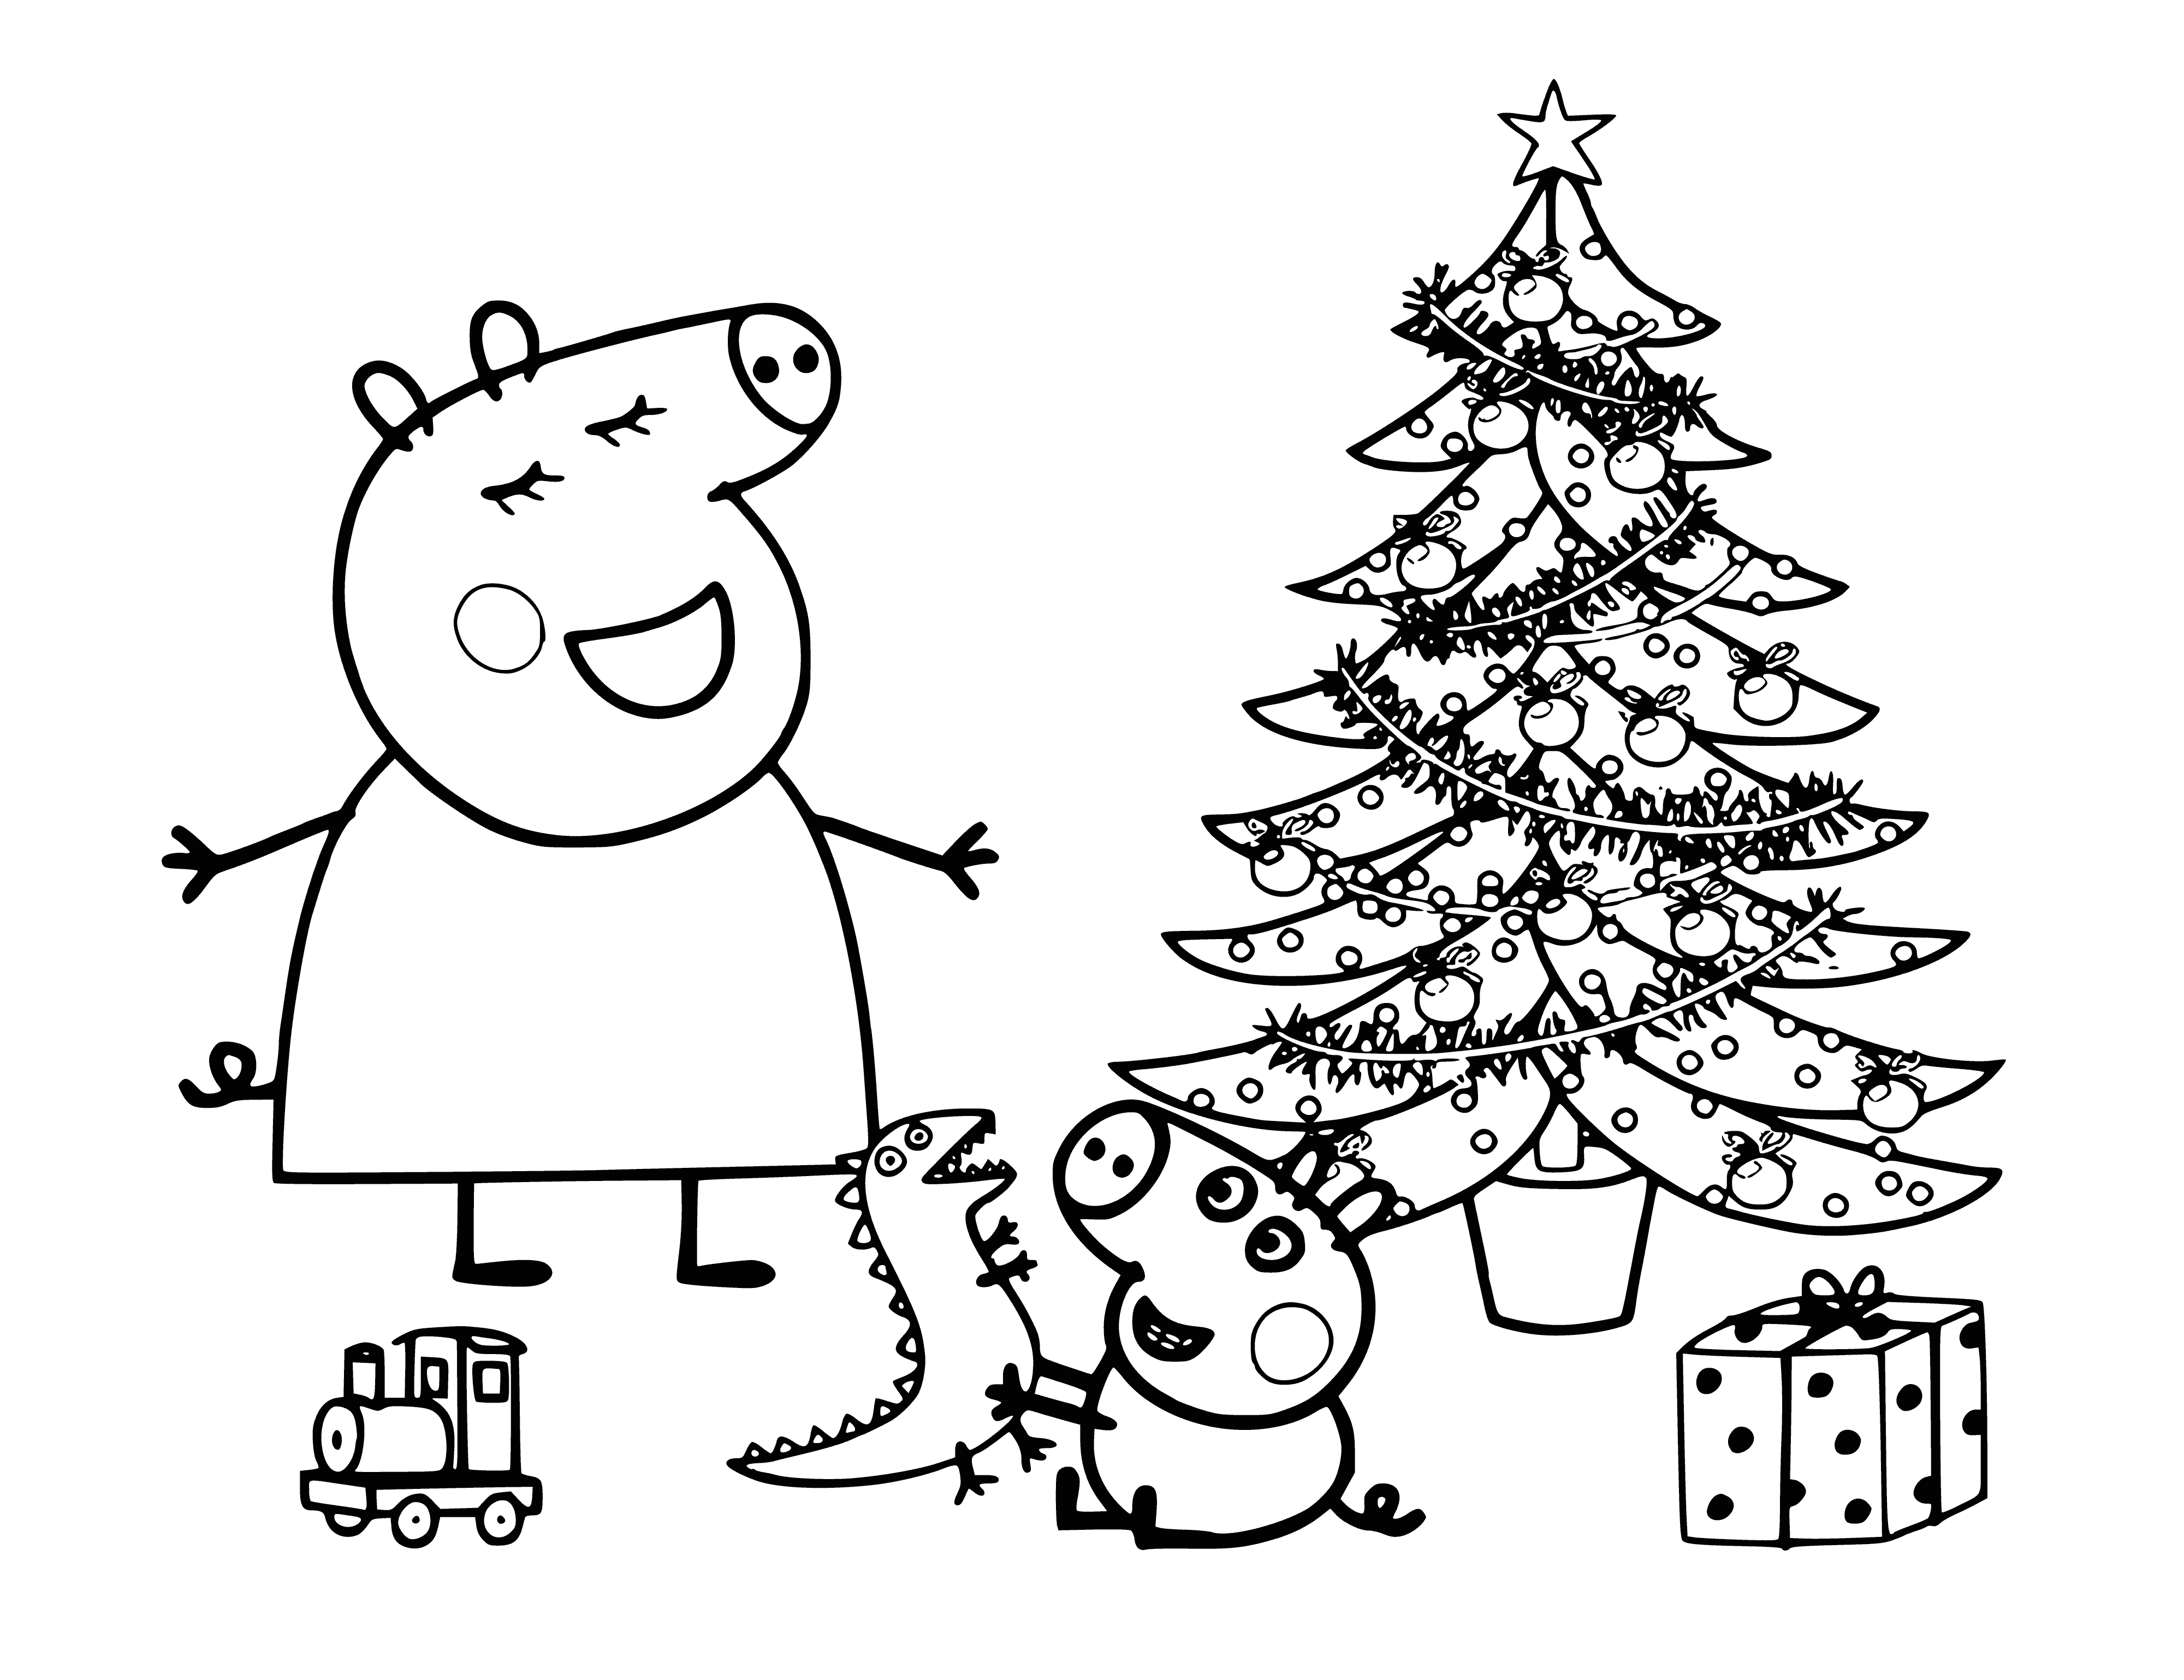 coloring page: Peppa, George & their parents all dressed up, standing by a fireplace, a clock saying it's midnight, holding balloons & champagne glasses-happy!